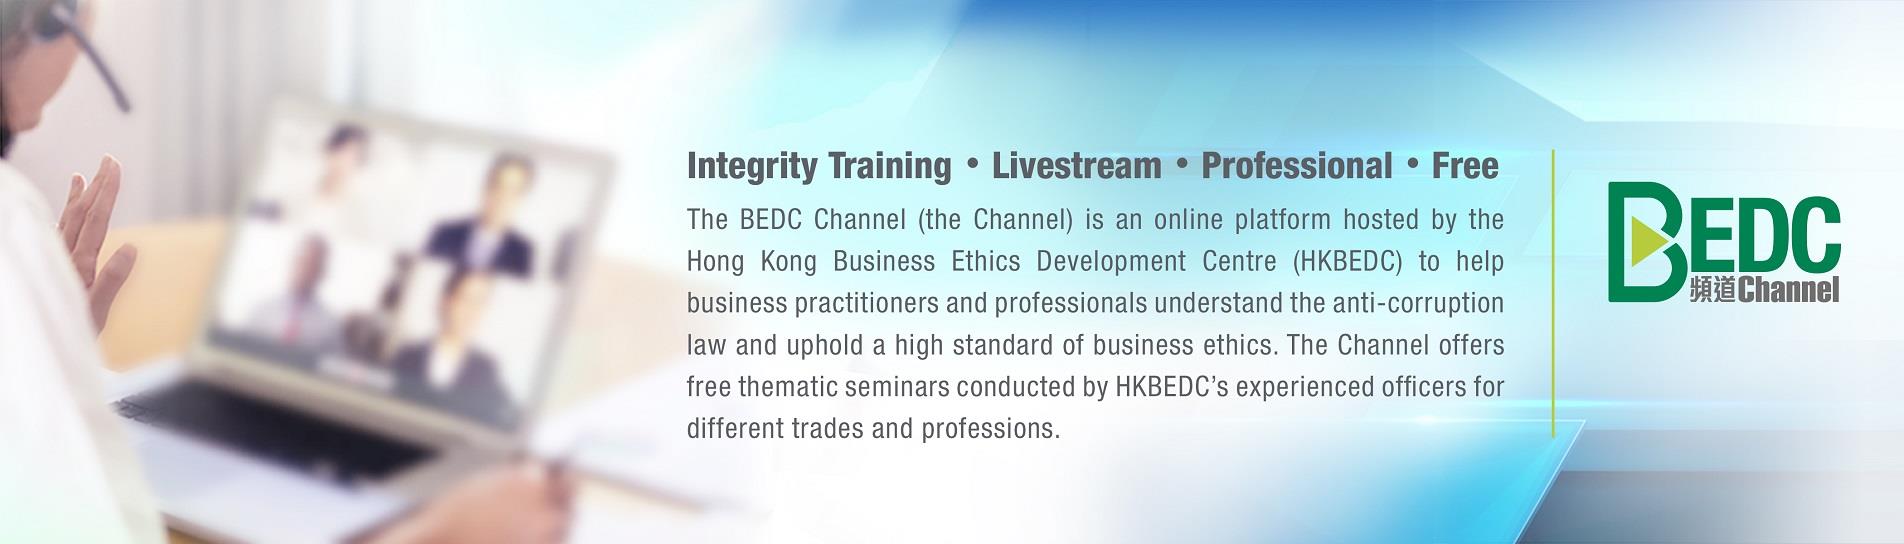 The BEDC Channel (the Channel) is an online platform hosted by the Hong Kong Business Ethics Development Centre (HKBEDC) to help business practitioners and professionals understand the anti-corruption law and uphold a high standard of business ethics. The Channel offers free thematic seminars conducted by HKBEDC’s experienced officers for different trades and professions.